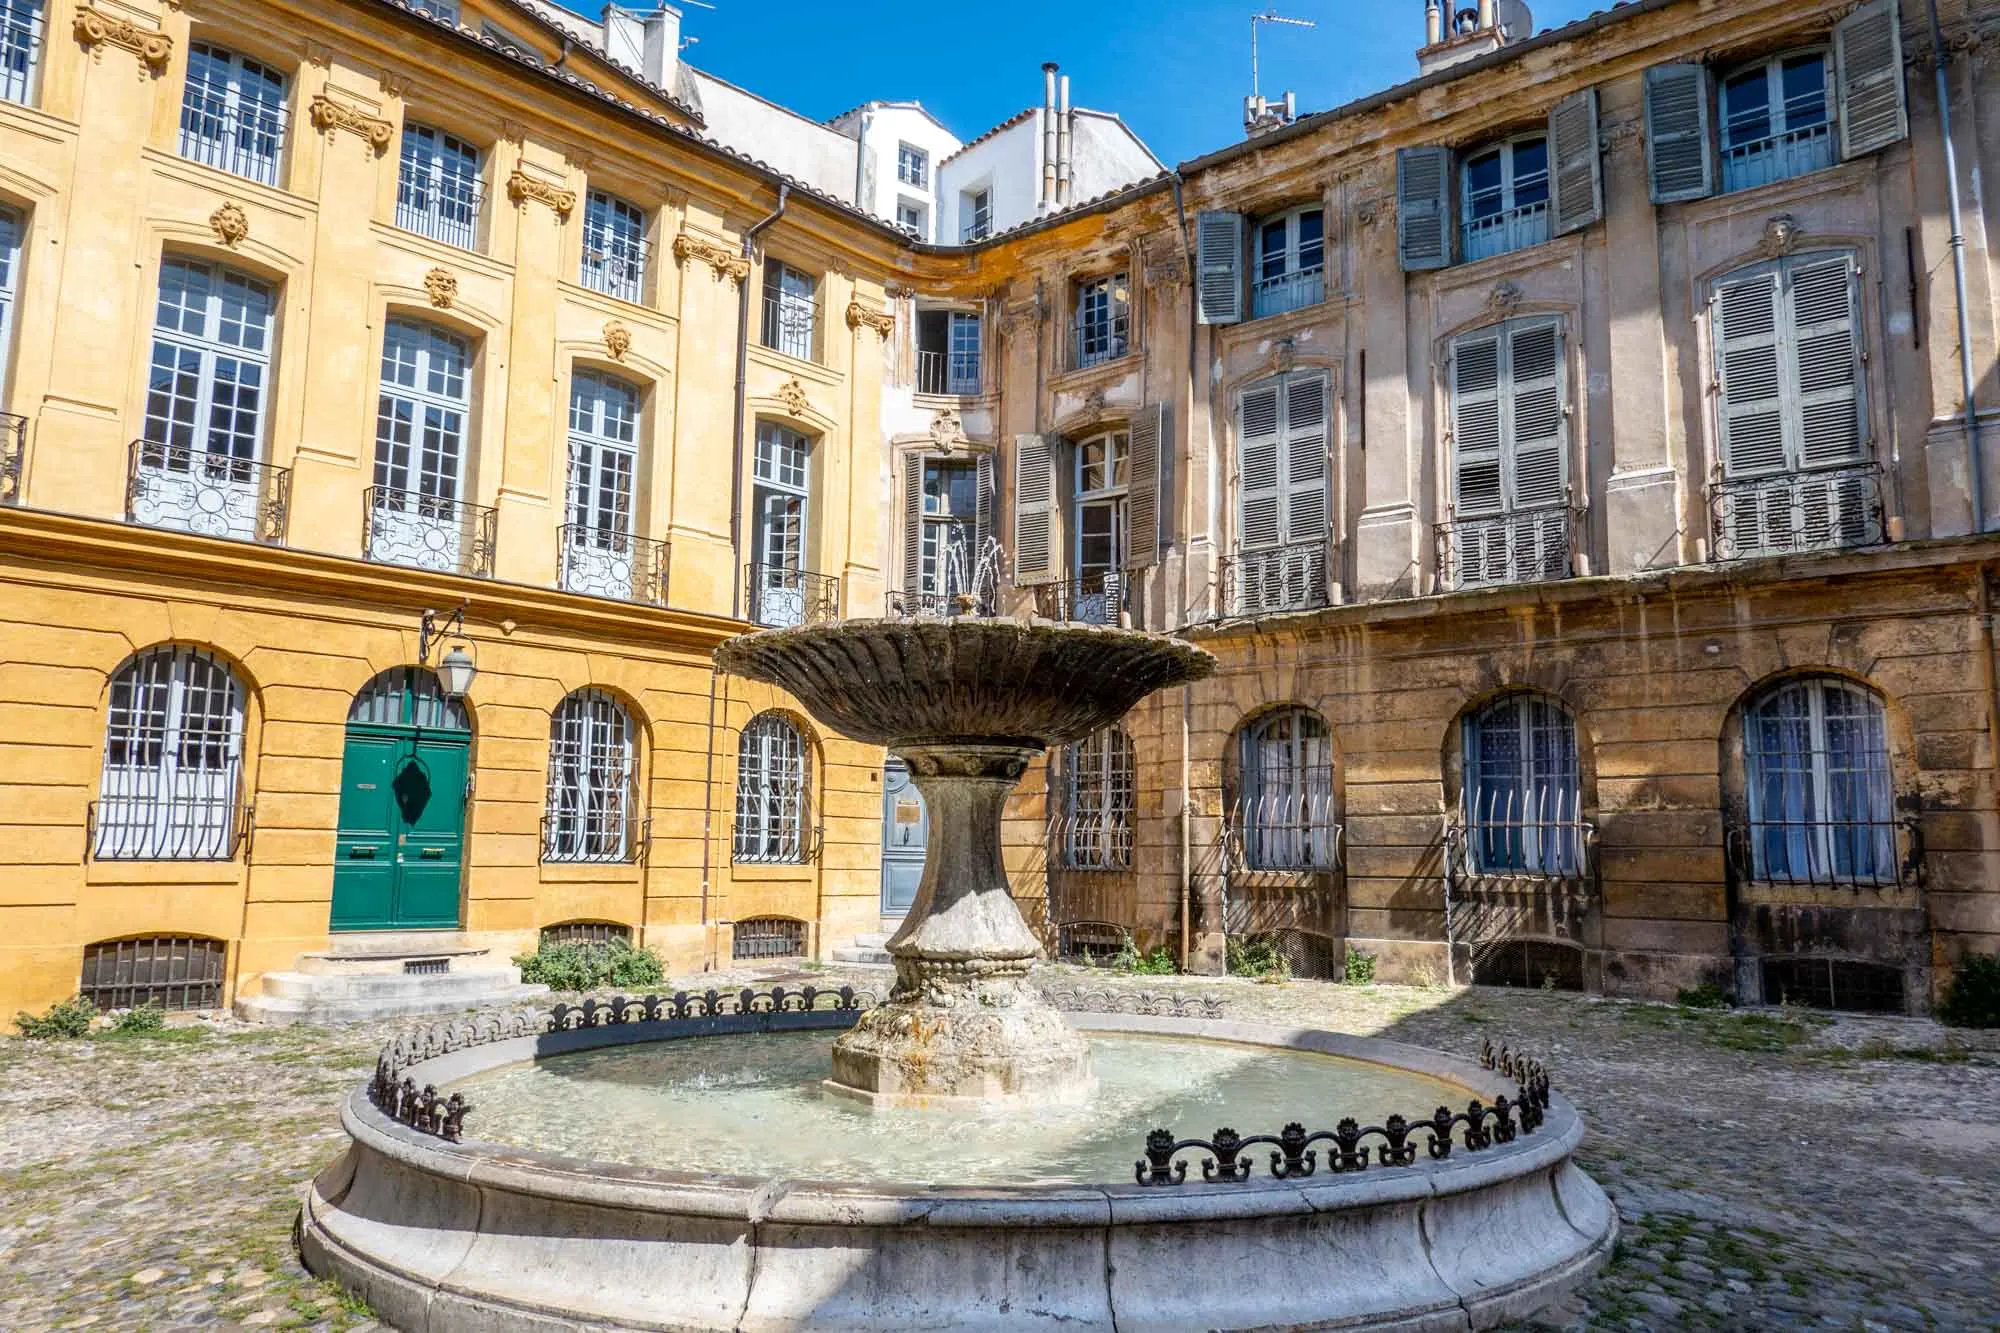 Fountain in a square surrounded by yellow buildings with wrought iron window decorations